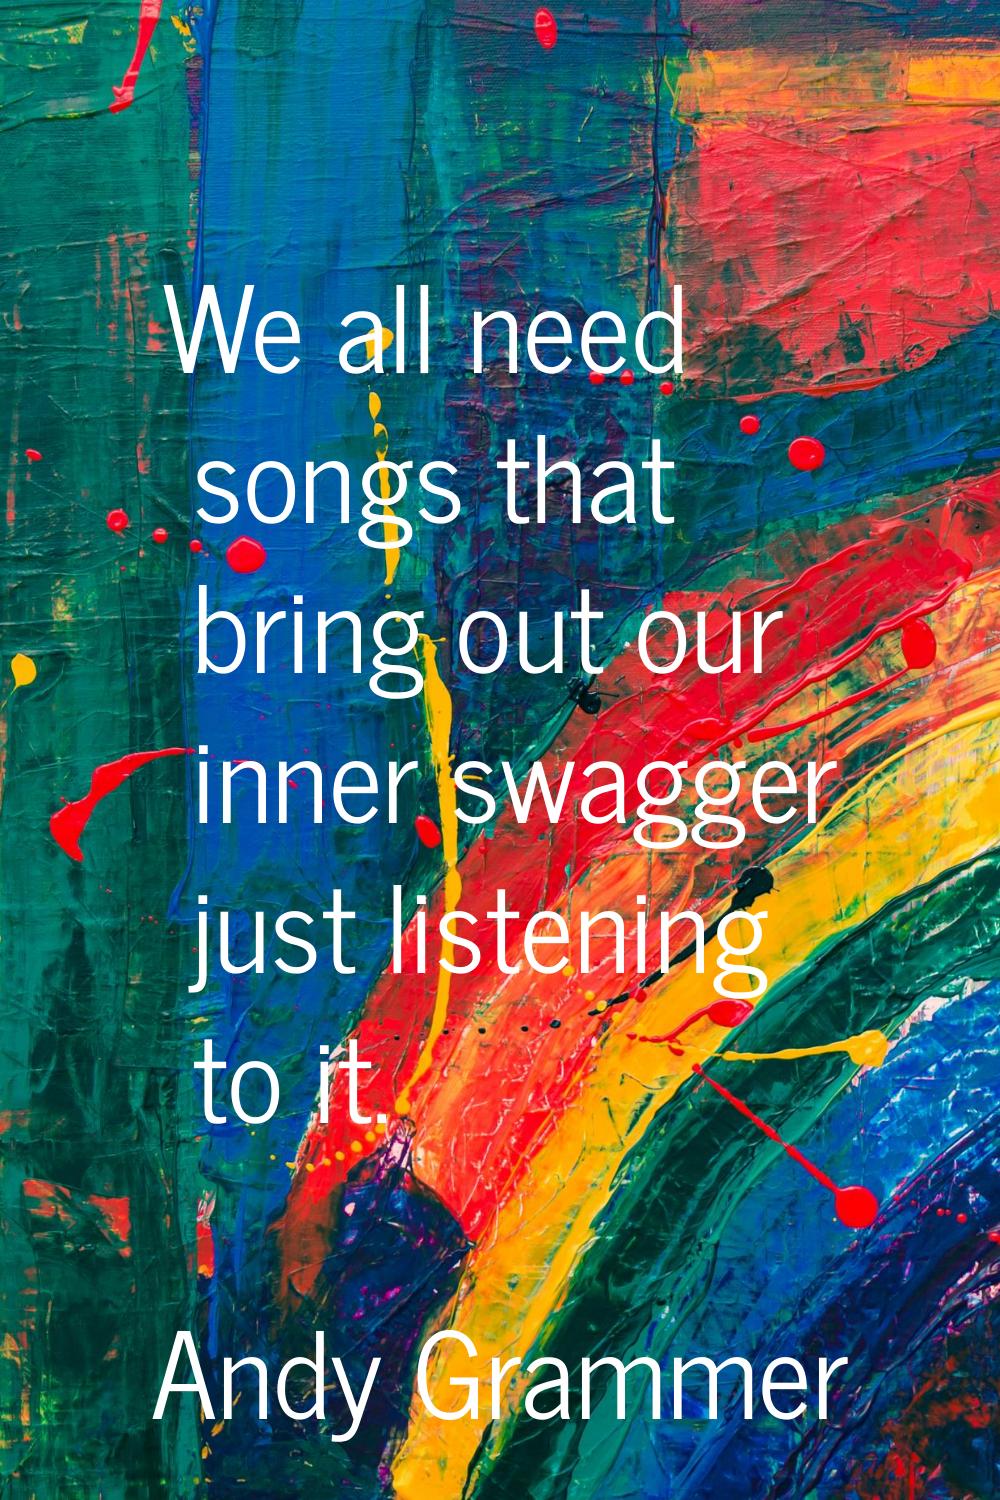 We all need songs that bring out our inner swagger just listening to it.